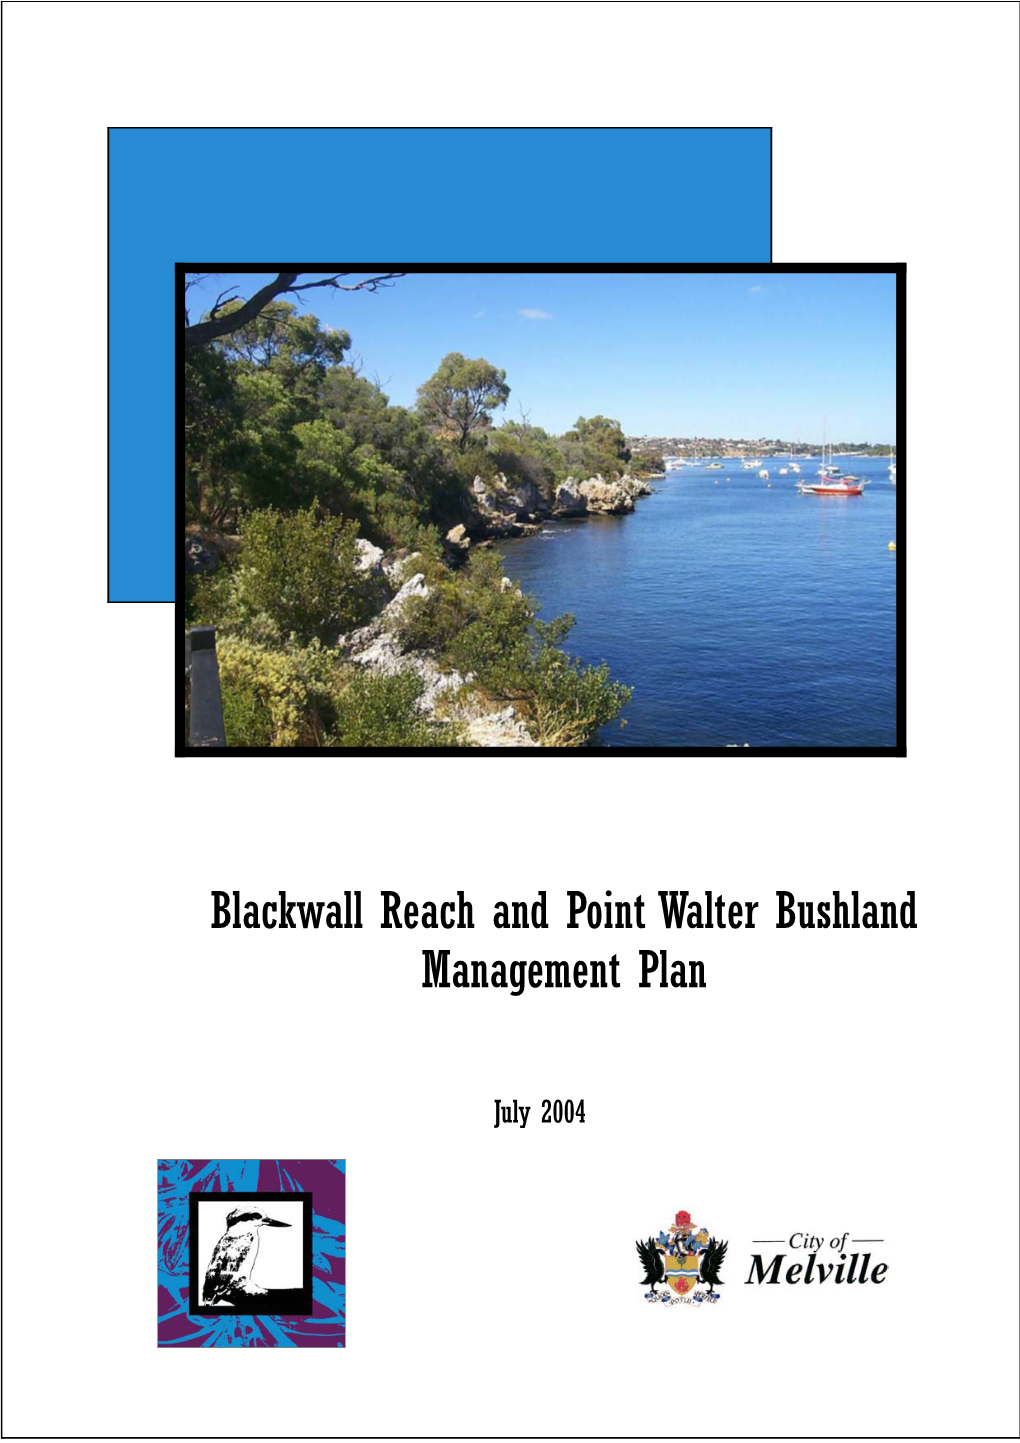 Blackwall Reach and Point Walter Bushland Management Plan